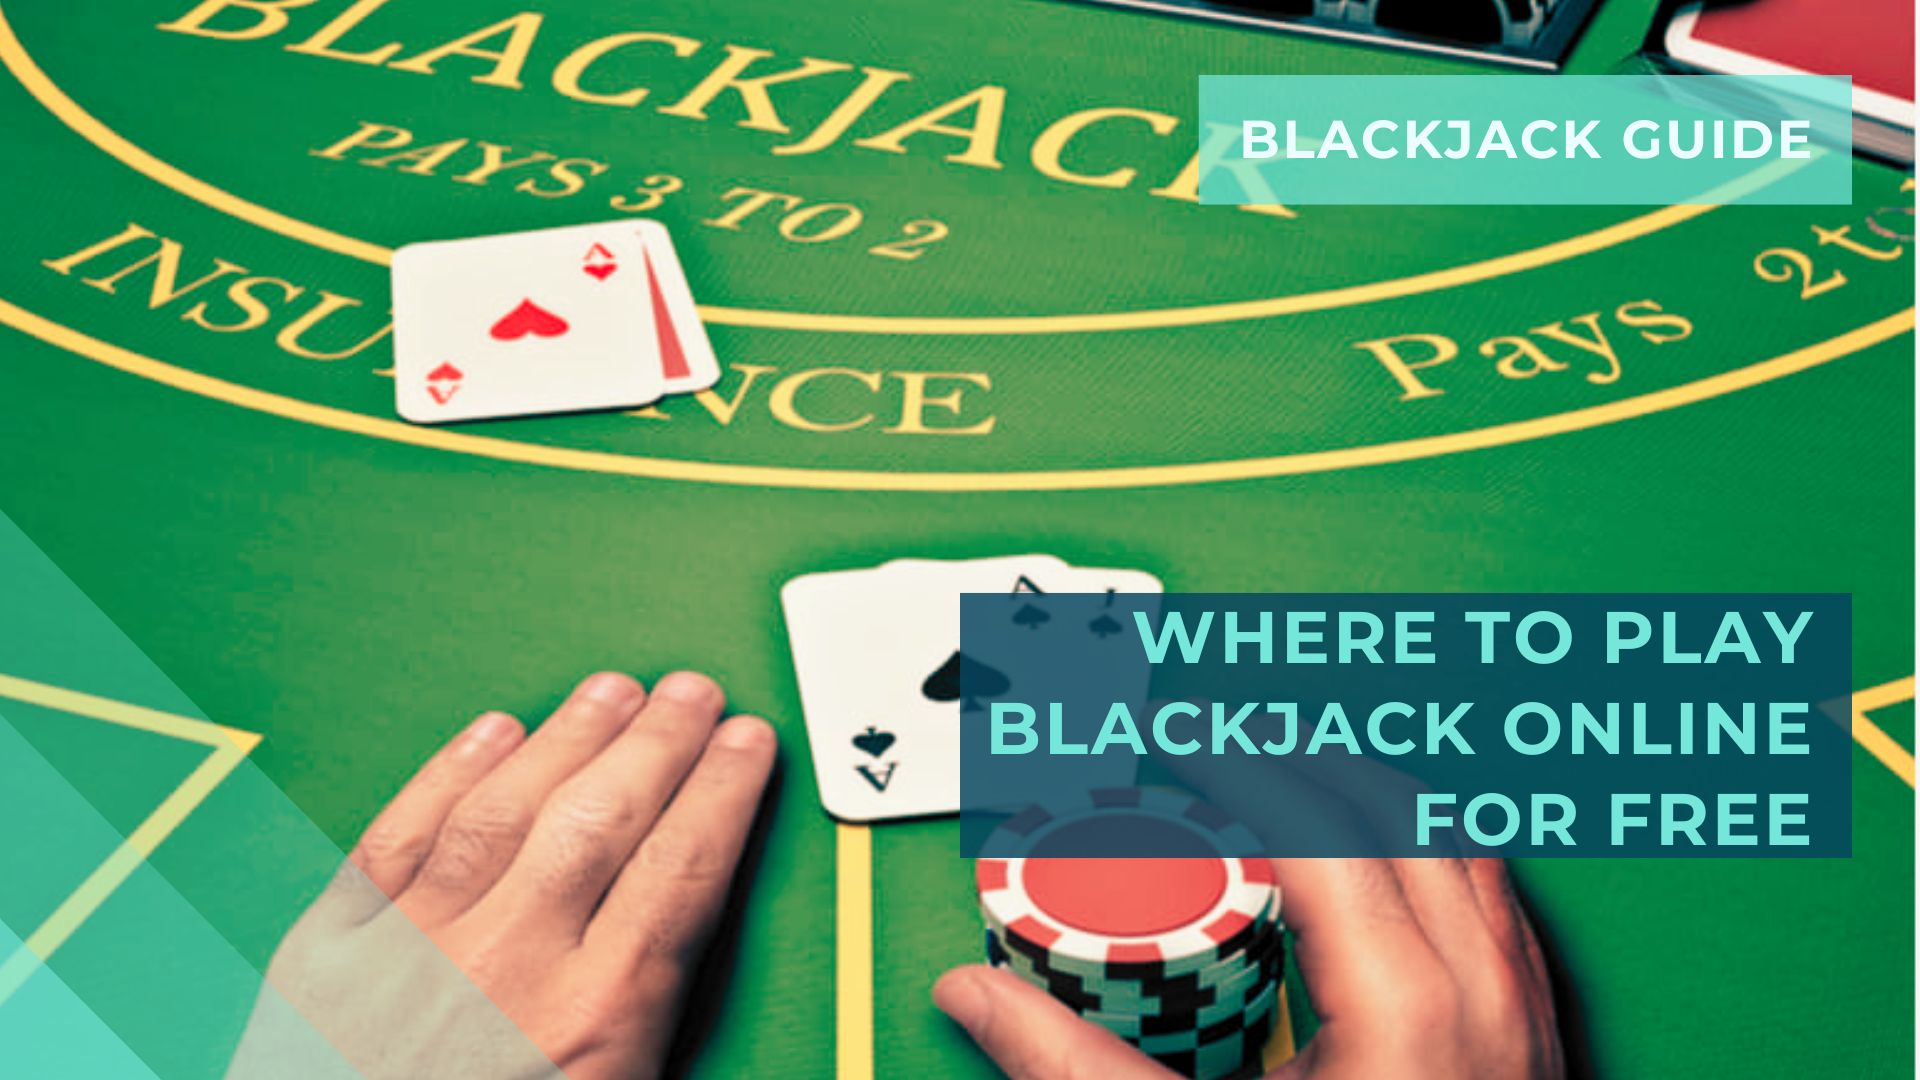 Where to play blackjack online for free